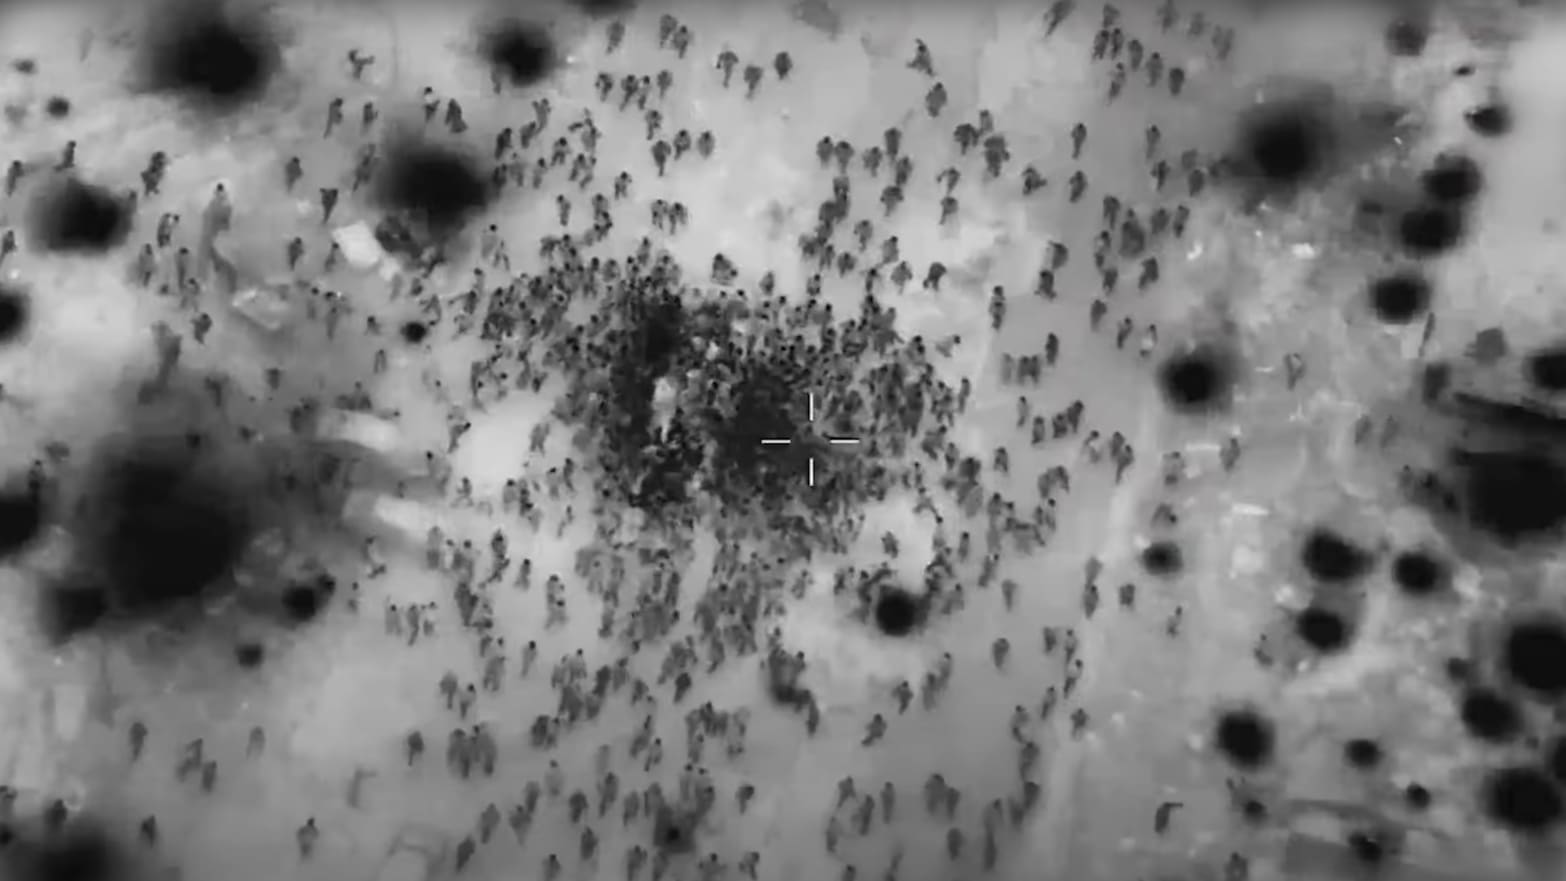 IDF video purportedly showing an incident in Gaza in which over 104 people were killed as they tried to get food aid, according to Palestinian officials. 